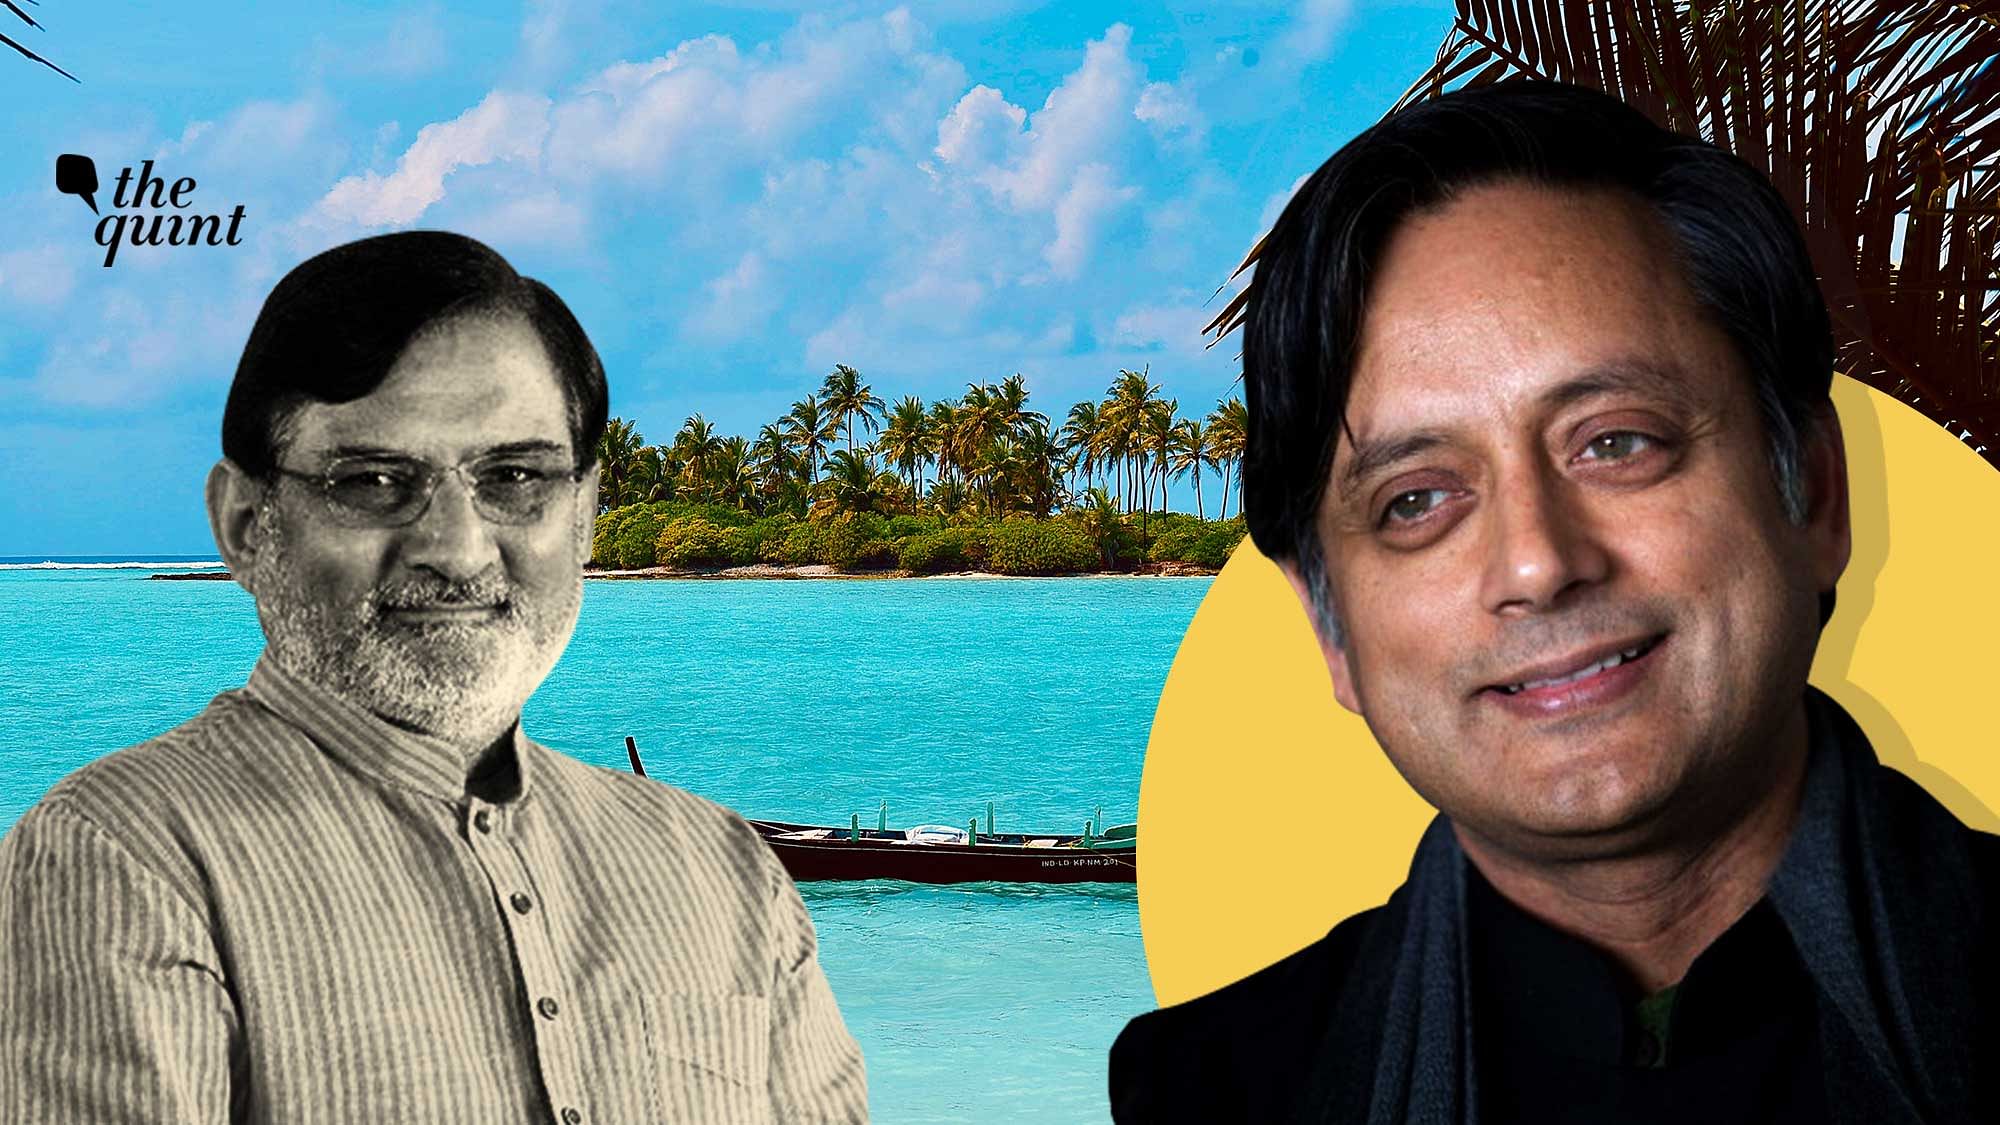 Image of Dr Shashi Tharoor (R) and Lakshadweep Administrator Praful Patel (L), against a background of an island in the Lakshadweep used for representation.